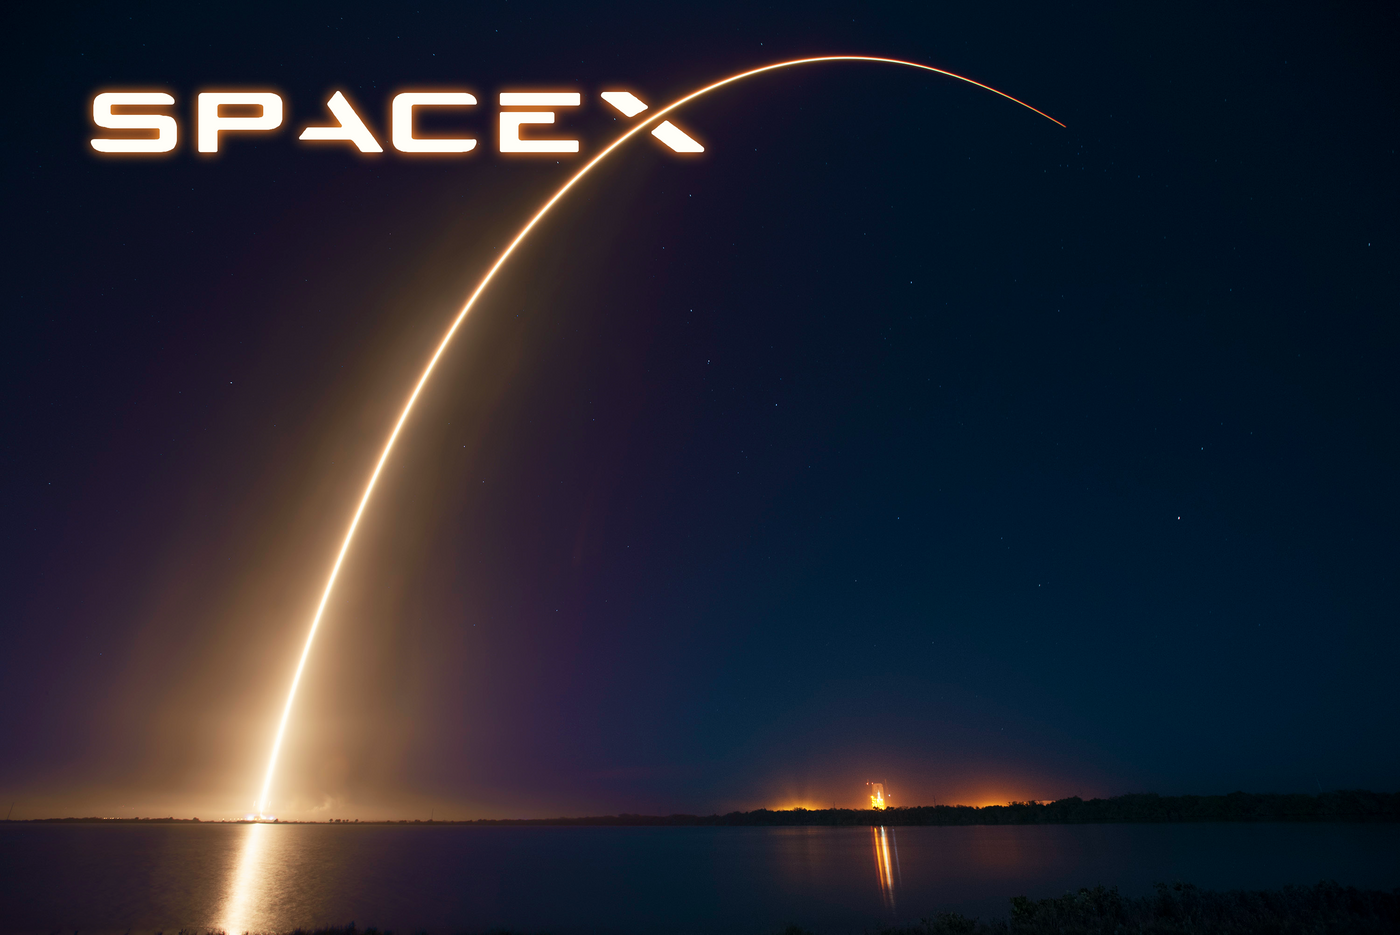 SpaceX has signed another contract with NASA for 5 future space missions.